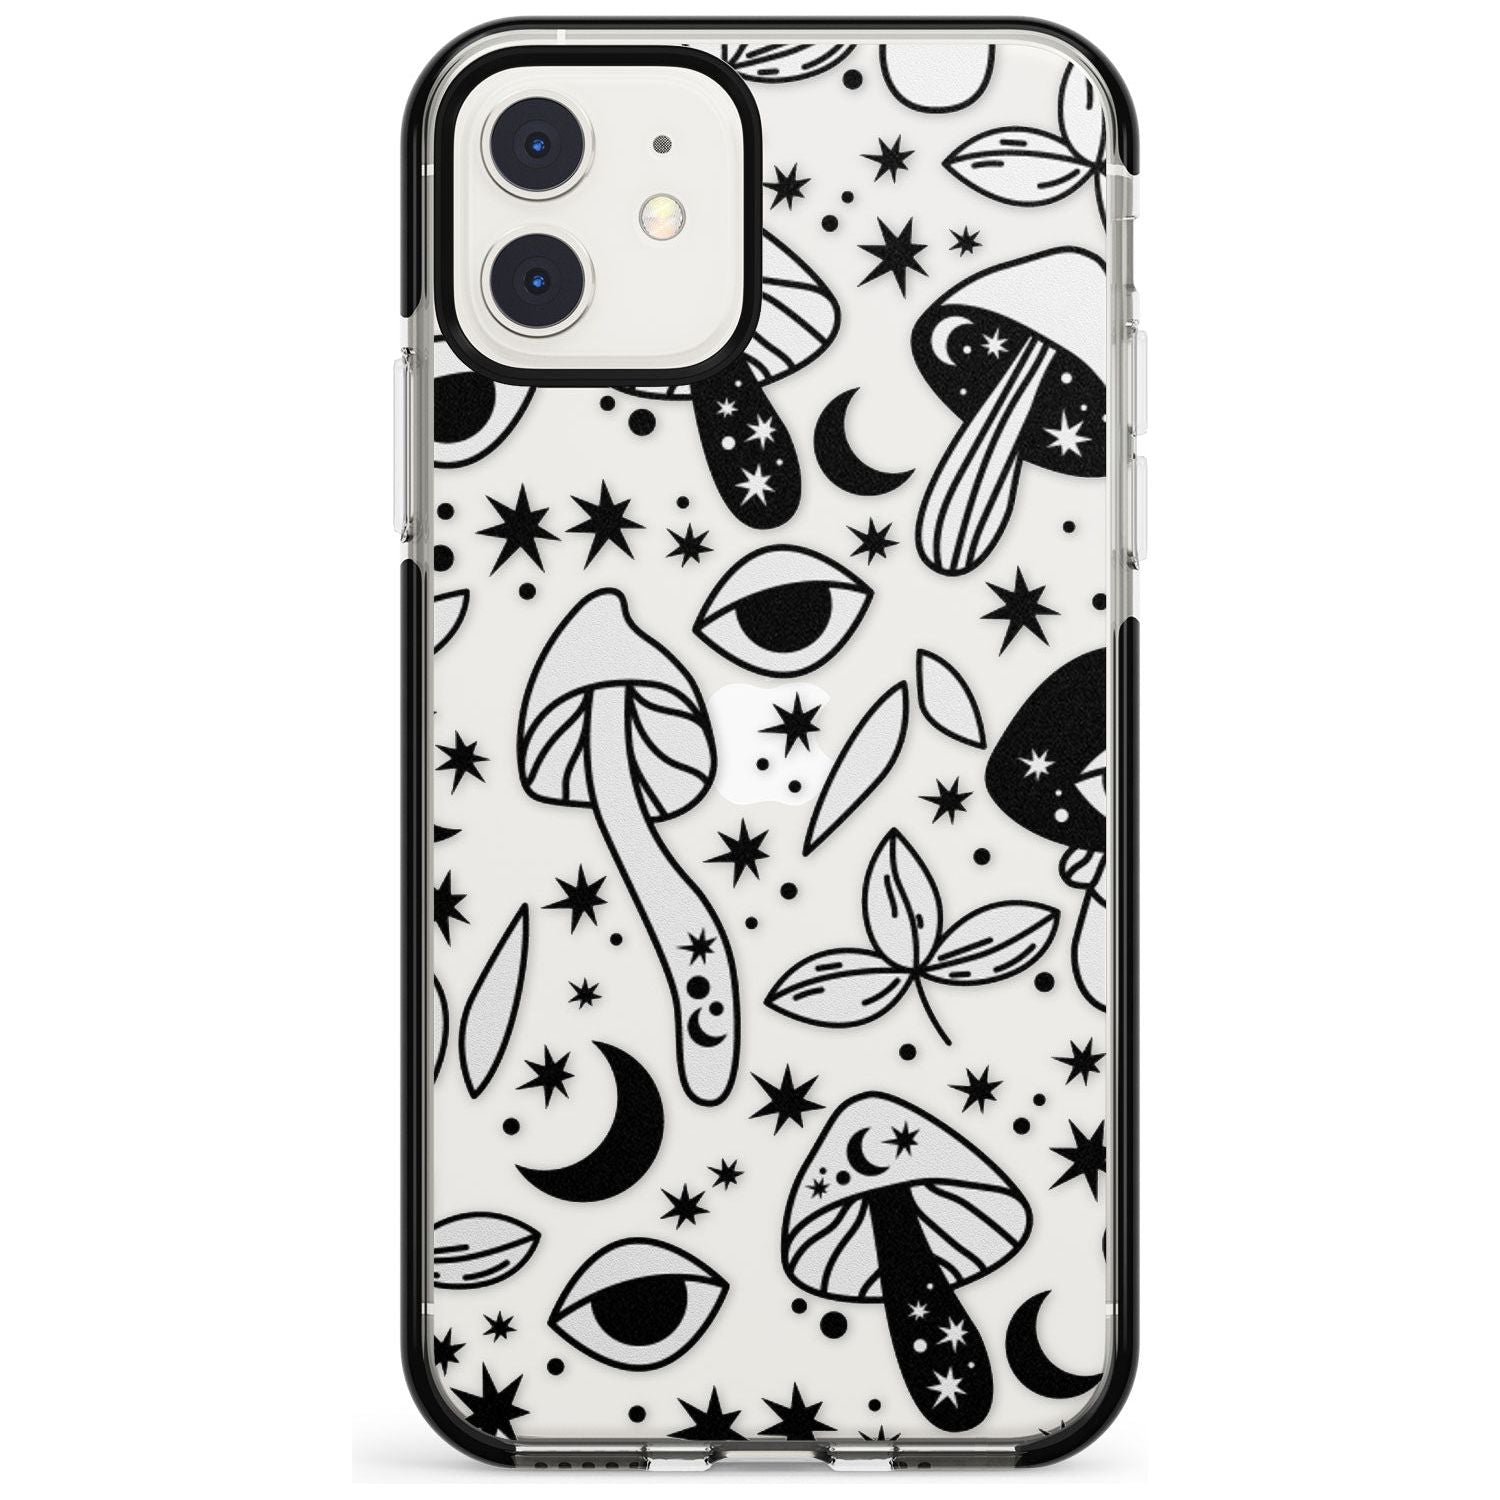 Psychedelic Mushrooms Pattern Black Impact Phone Case for iPhone 11 Pro Max